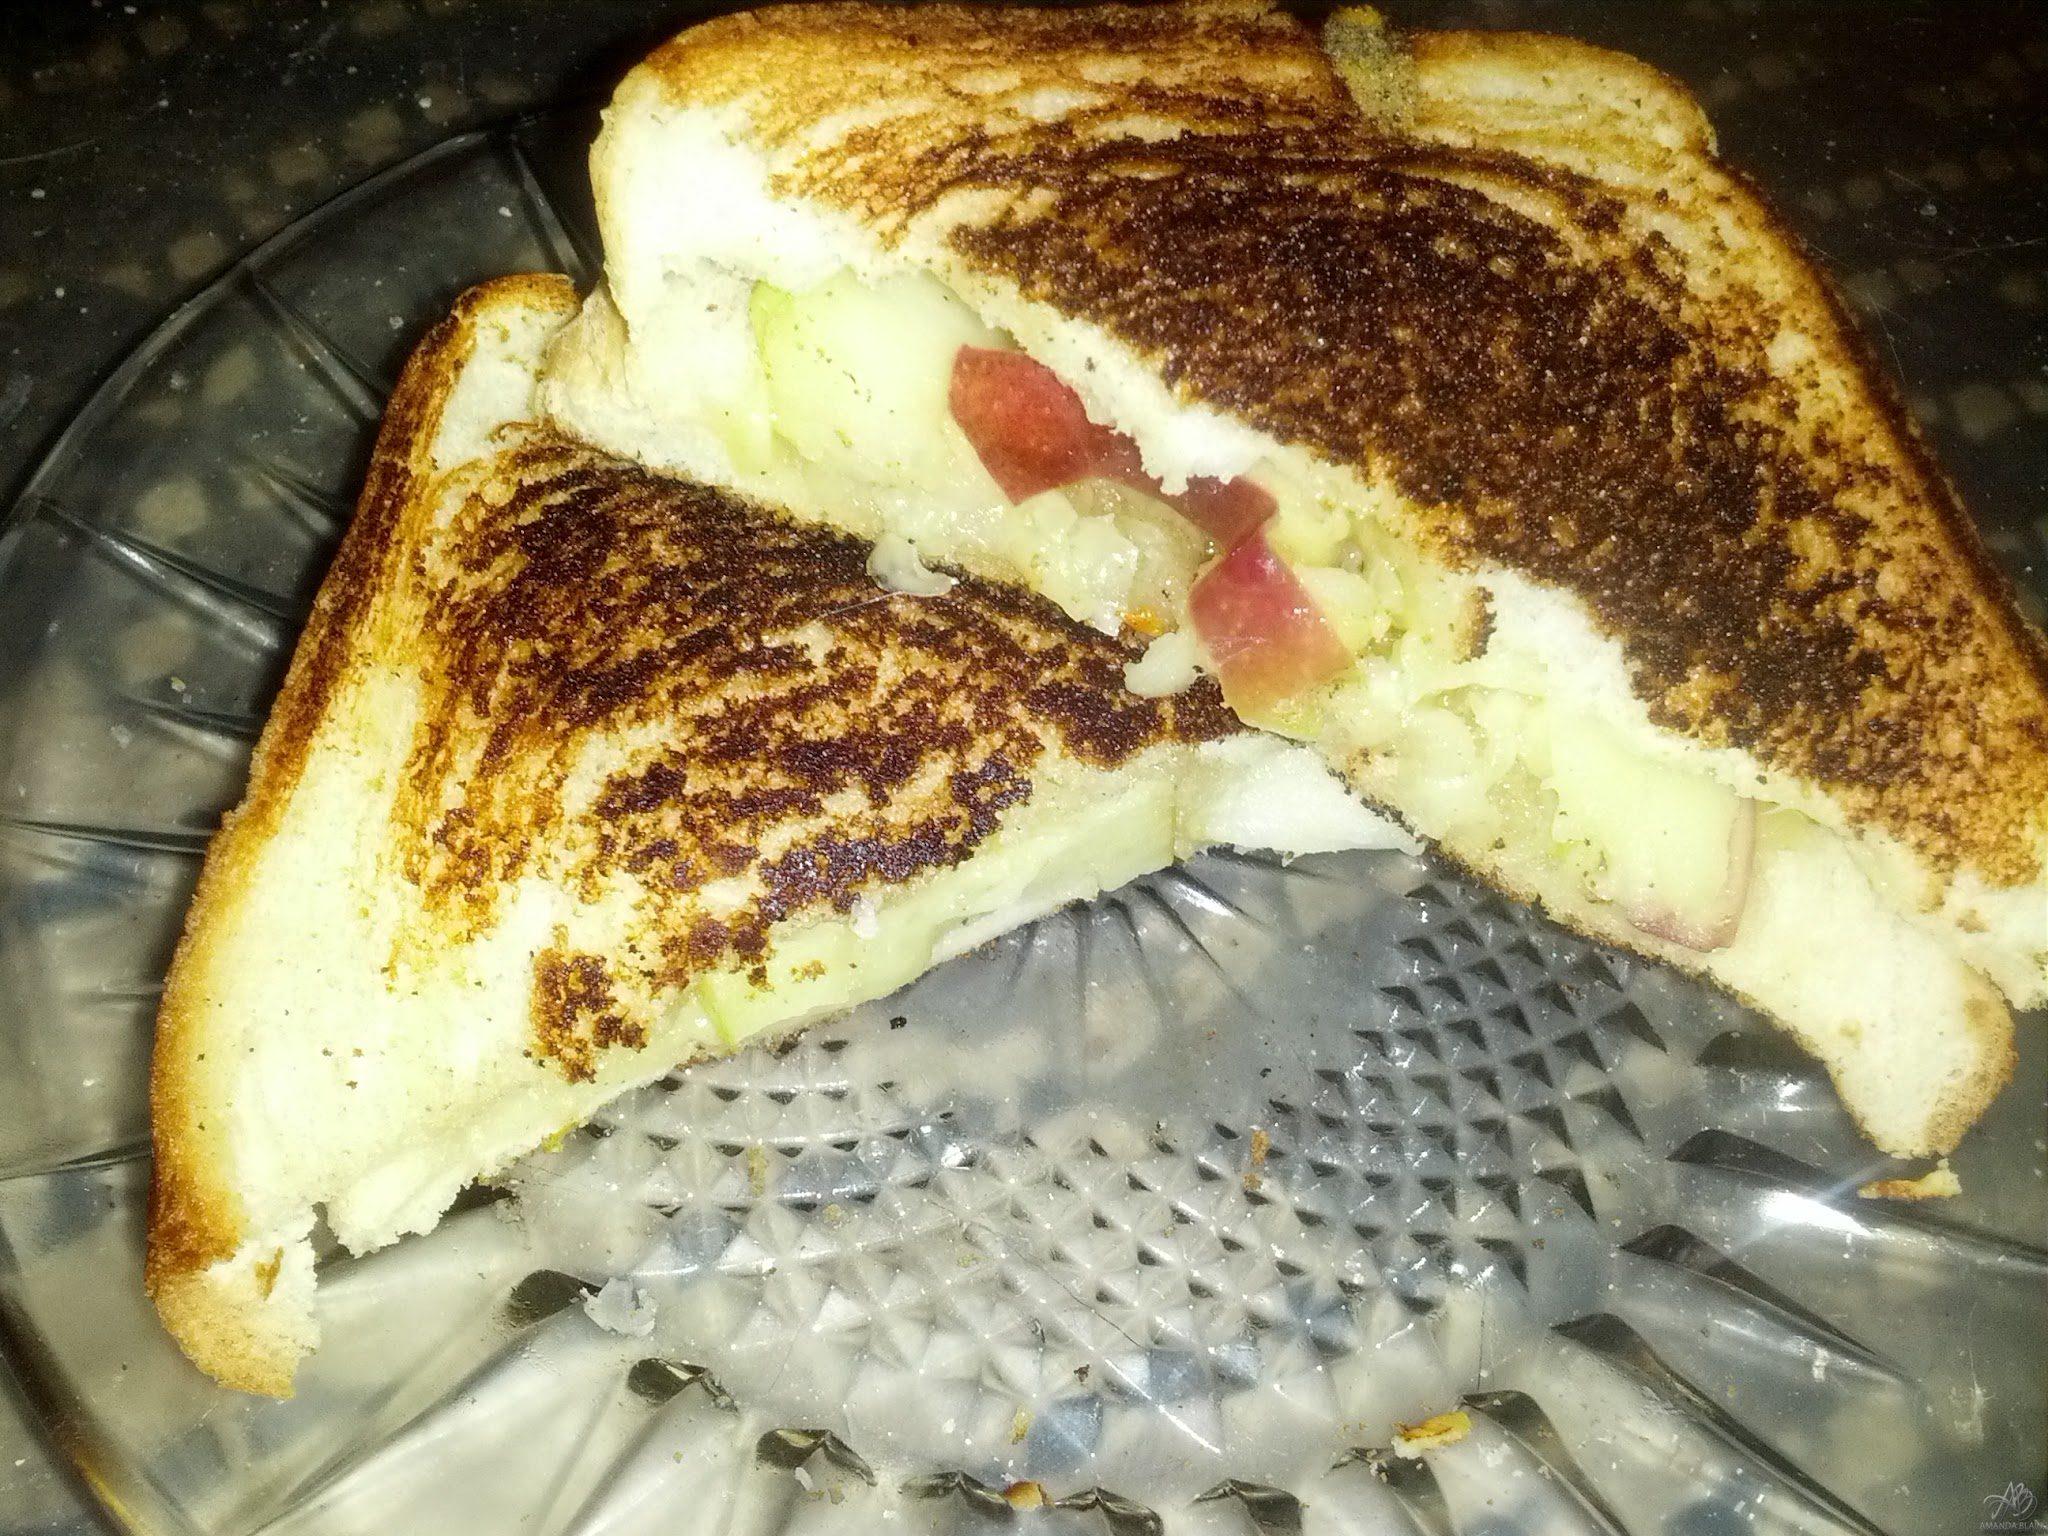 red macantosh apples gruyere swiss cheese with a drizzle of honey grill cheese